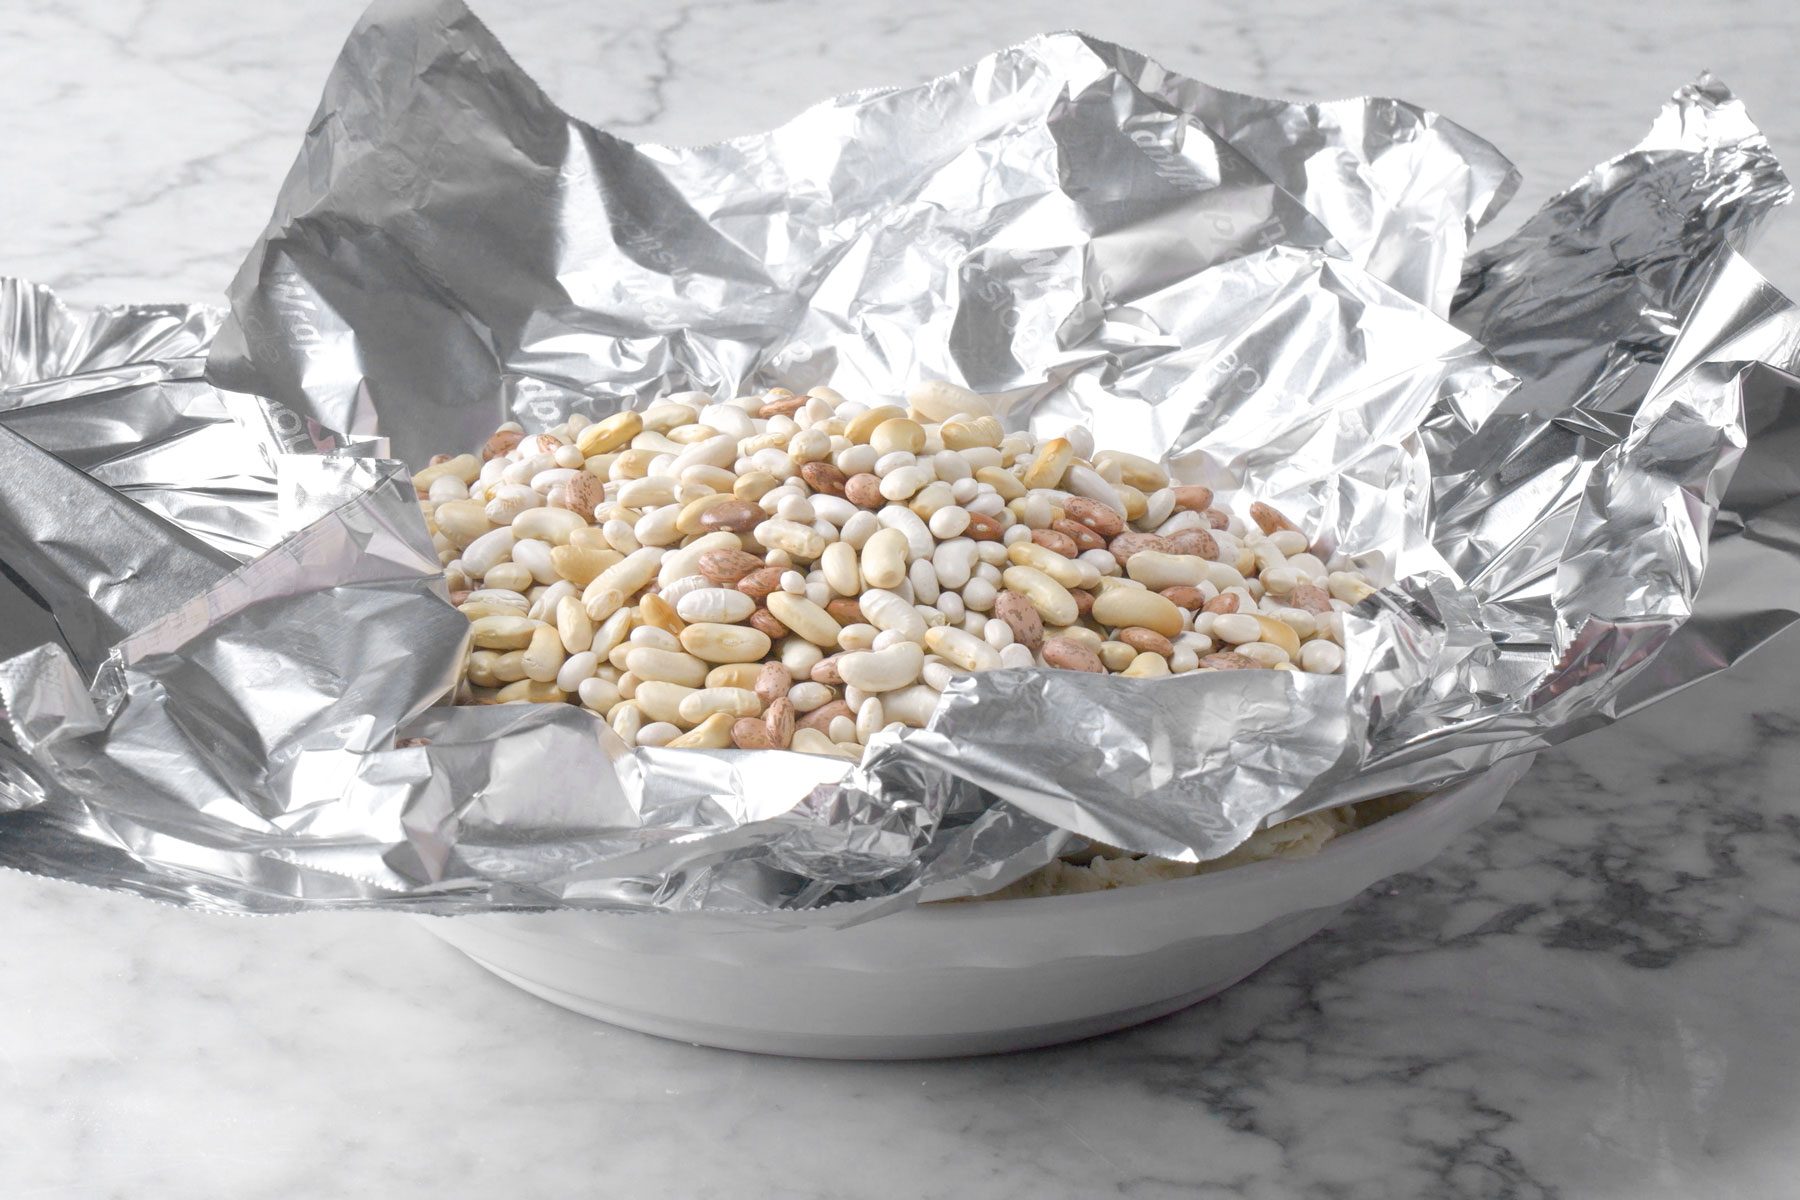 Dried beans spread on foil paper on a bowl